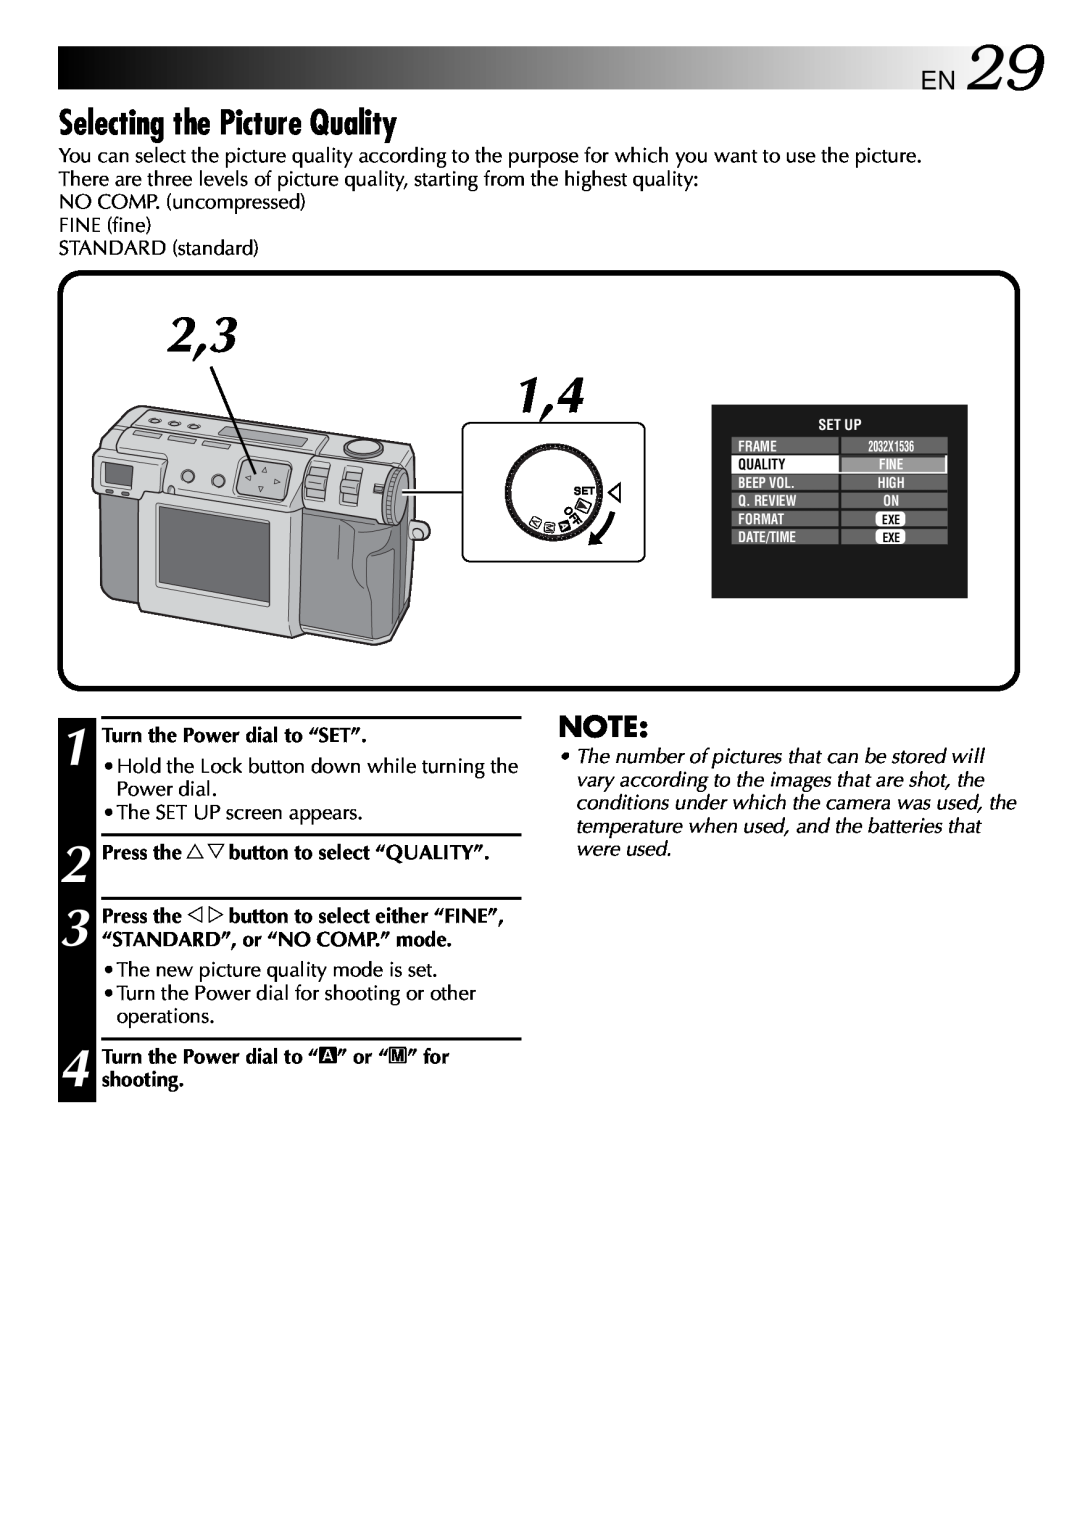 JVC GC-QX3 manual Selecting the Picture Quality, EN29, 2,3 1,4, Turn the Power dial to “SET” 